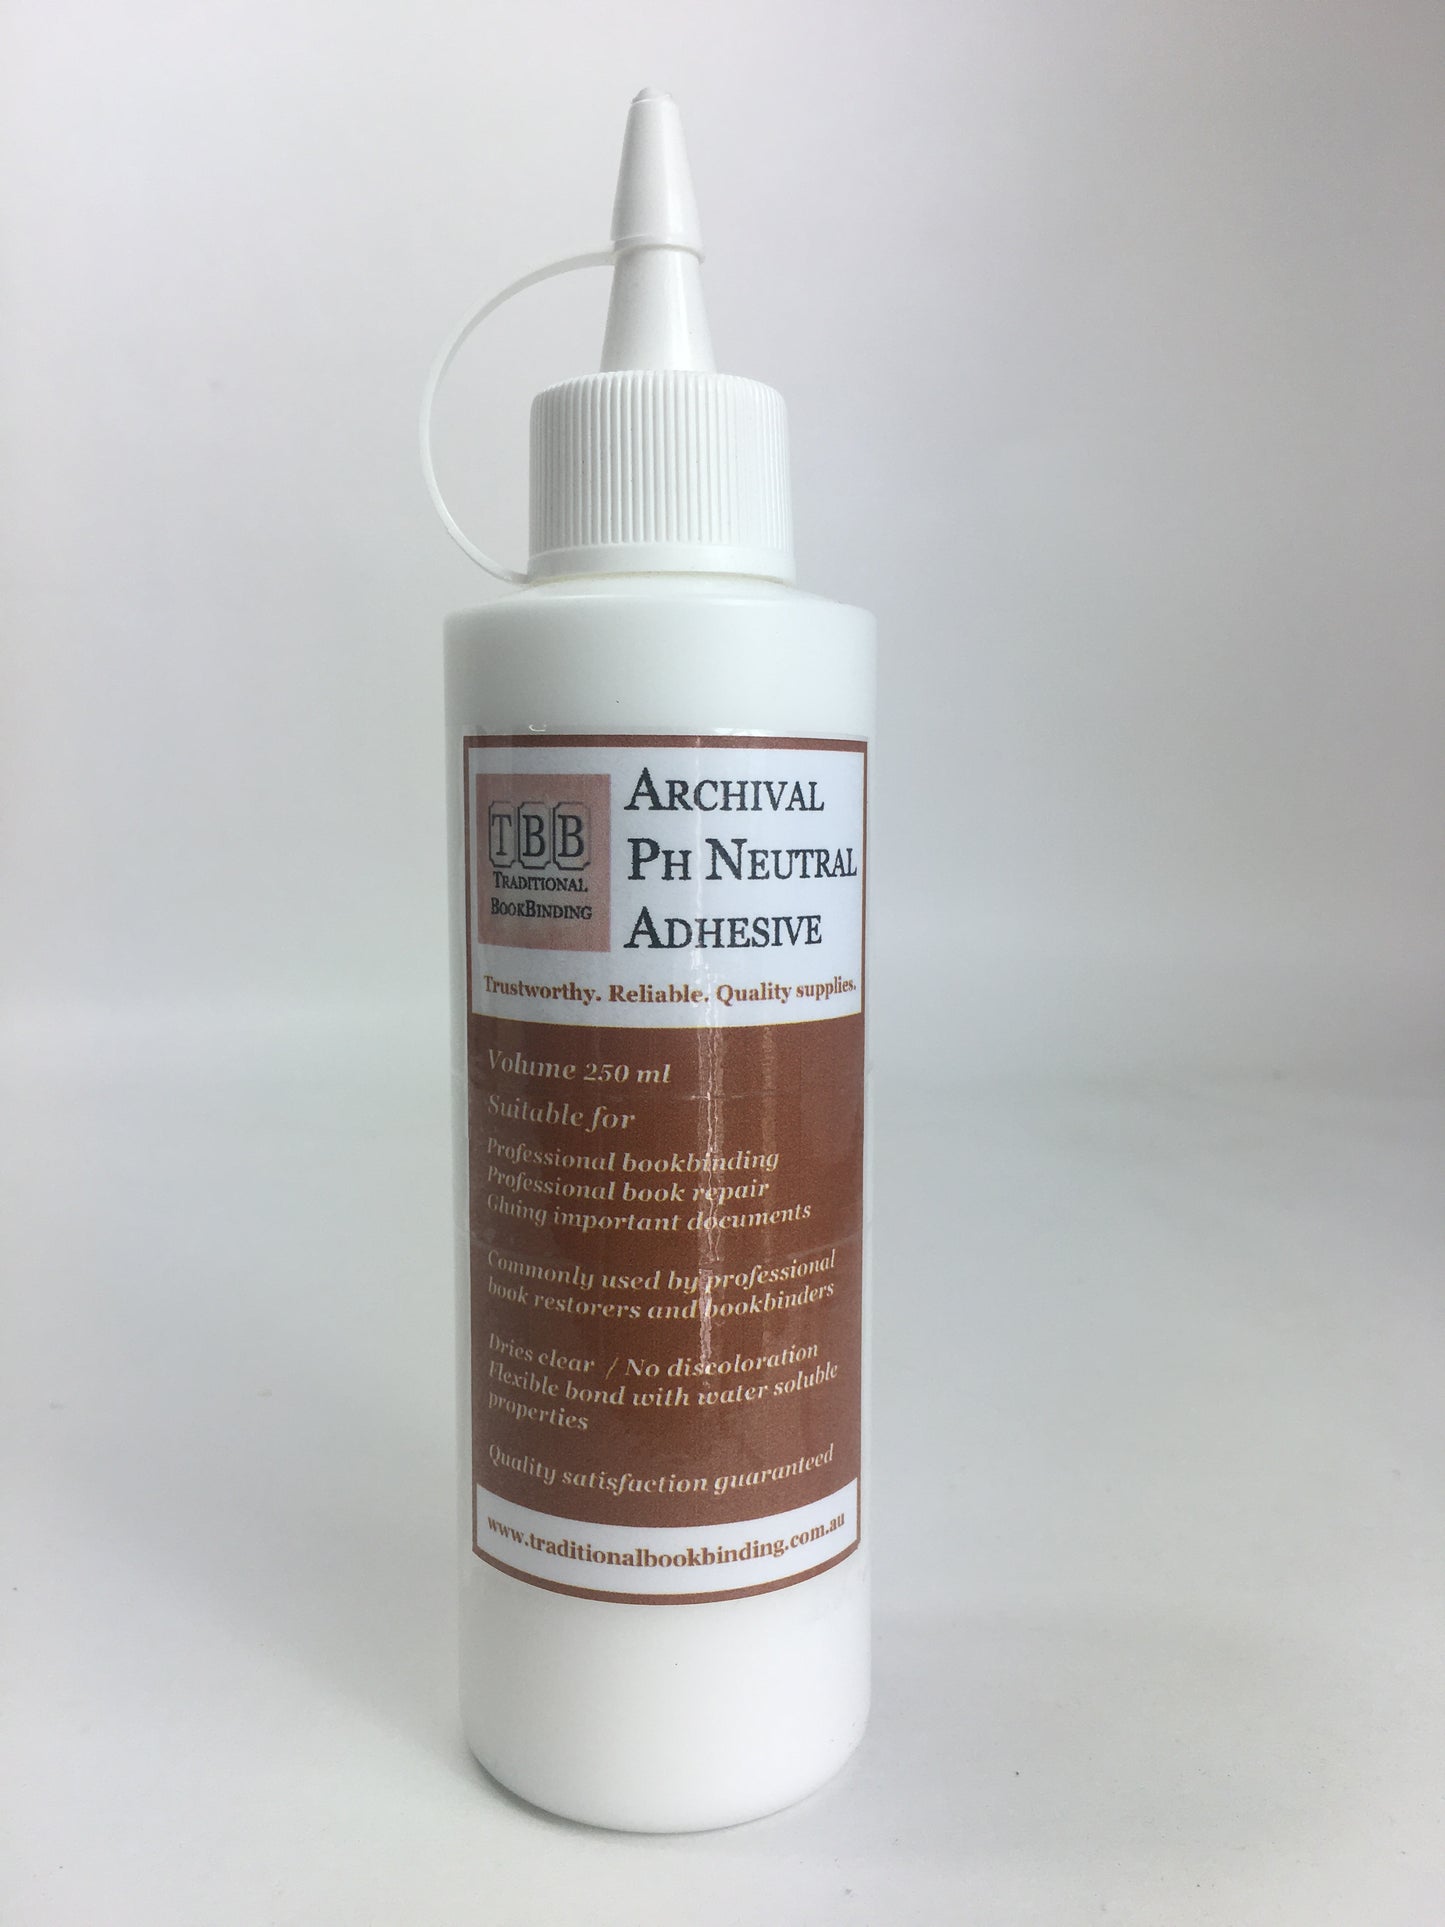 ARCHIVAL Neutral PH Adhesive- Museum quality bookbinding glue- Professional standard